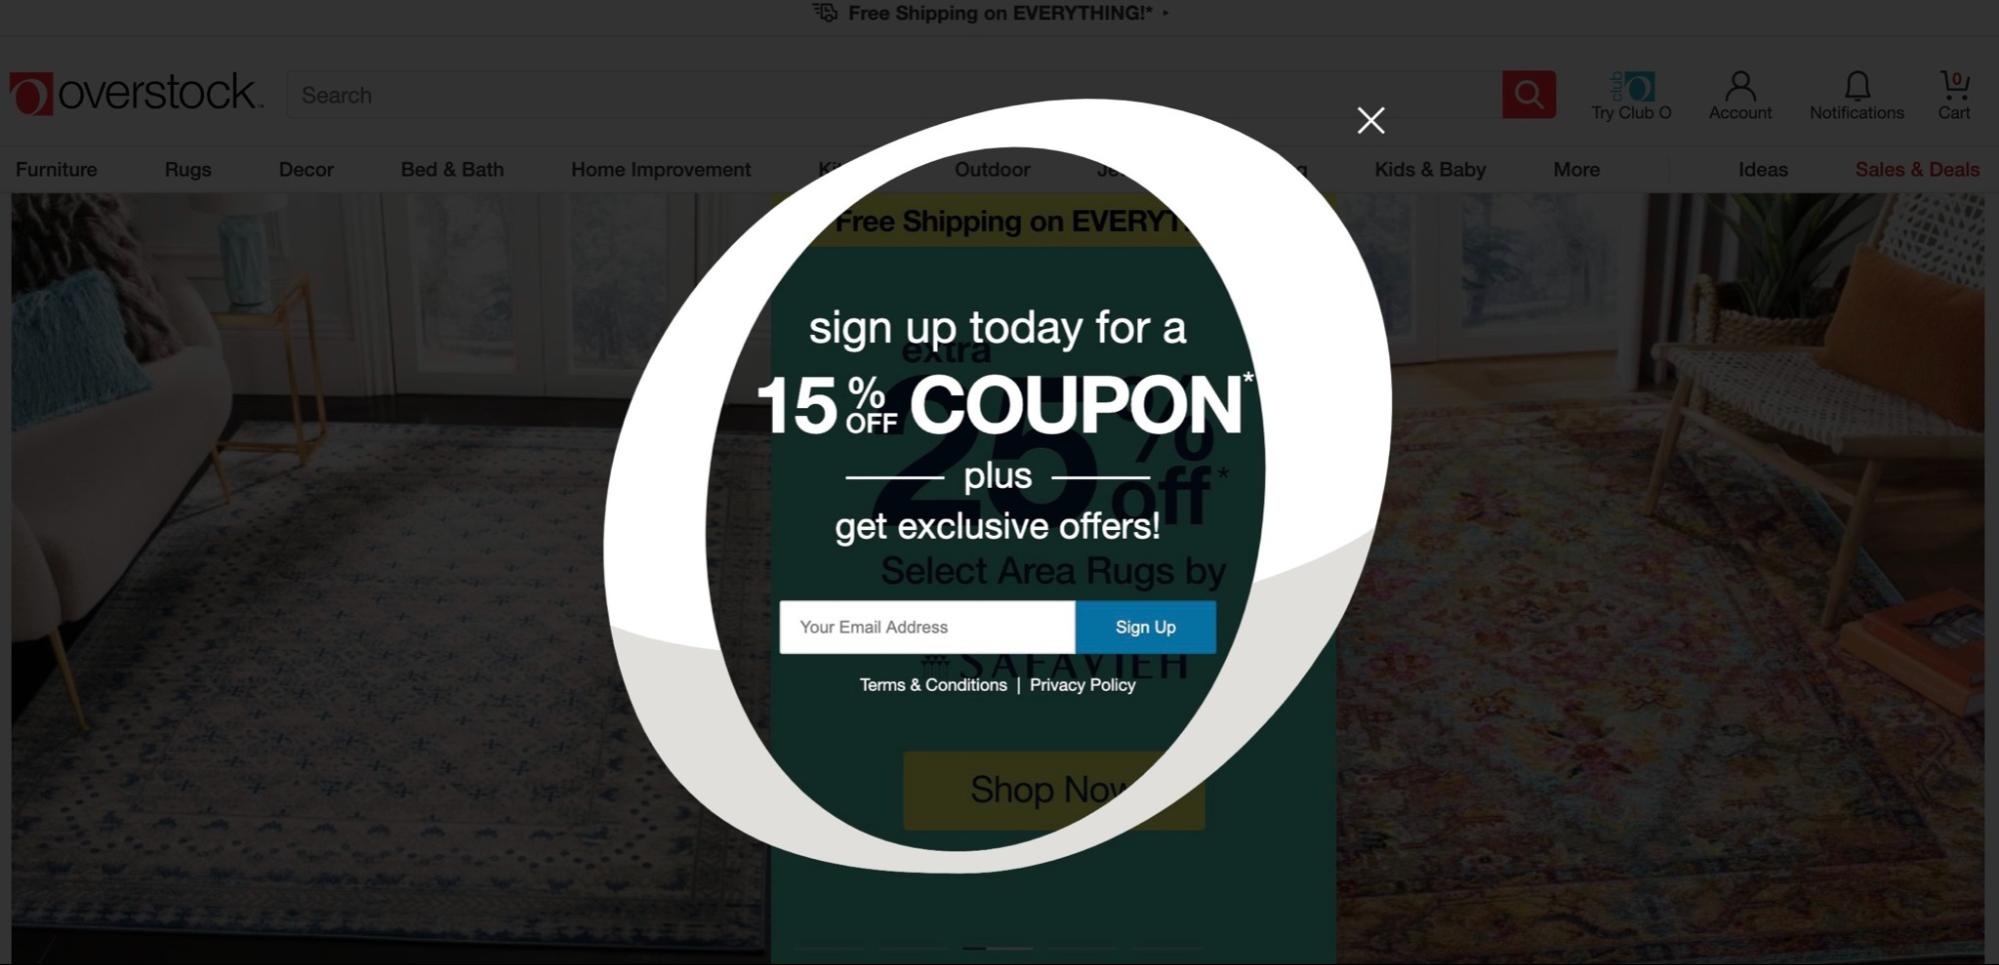 Example of a discount used as a lead magnet to capture email addresses and customer contact details